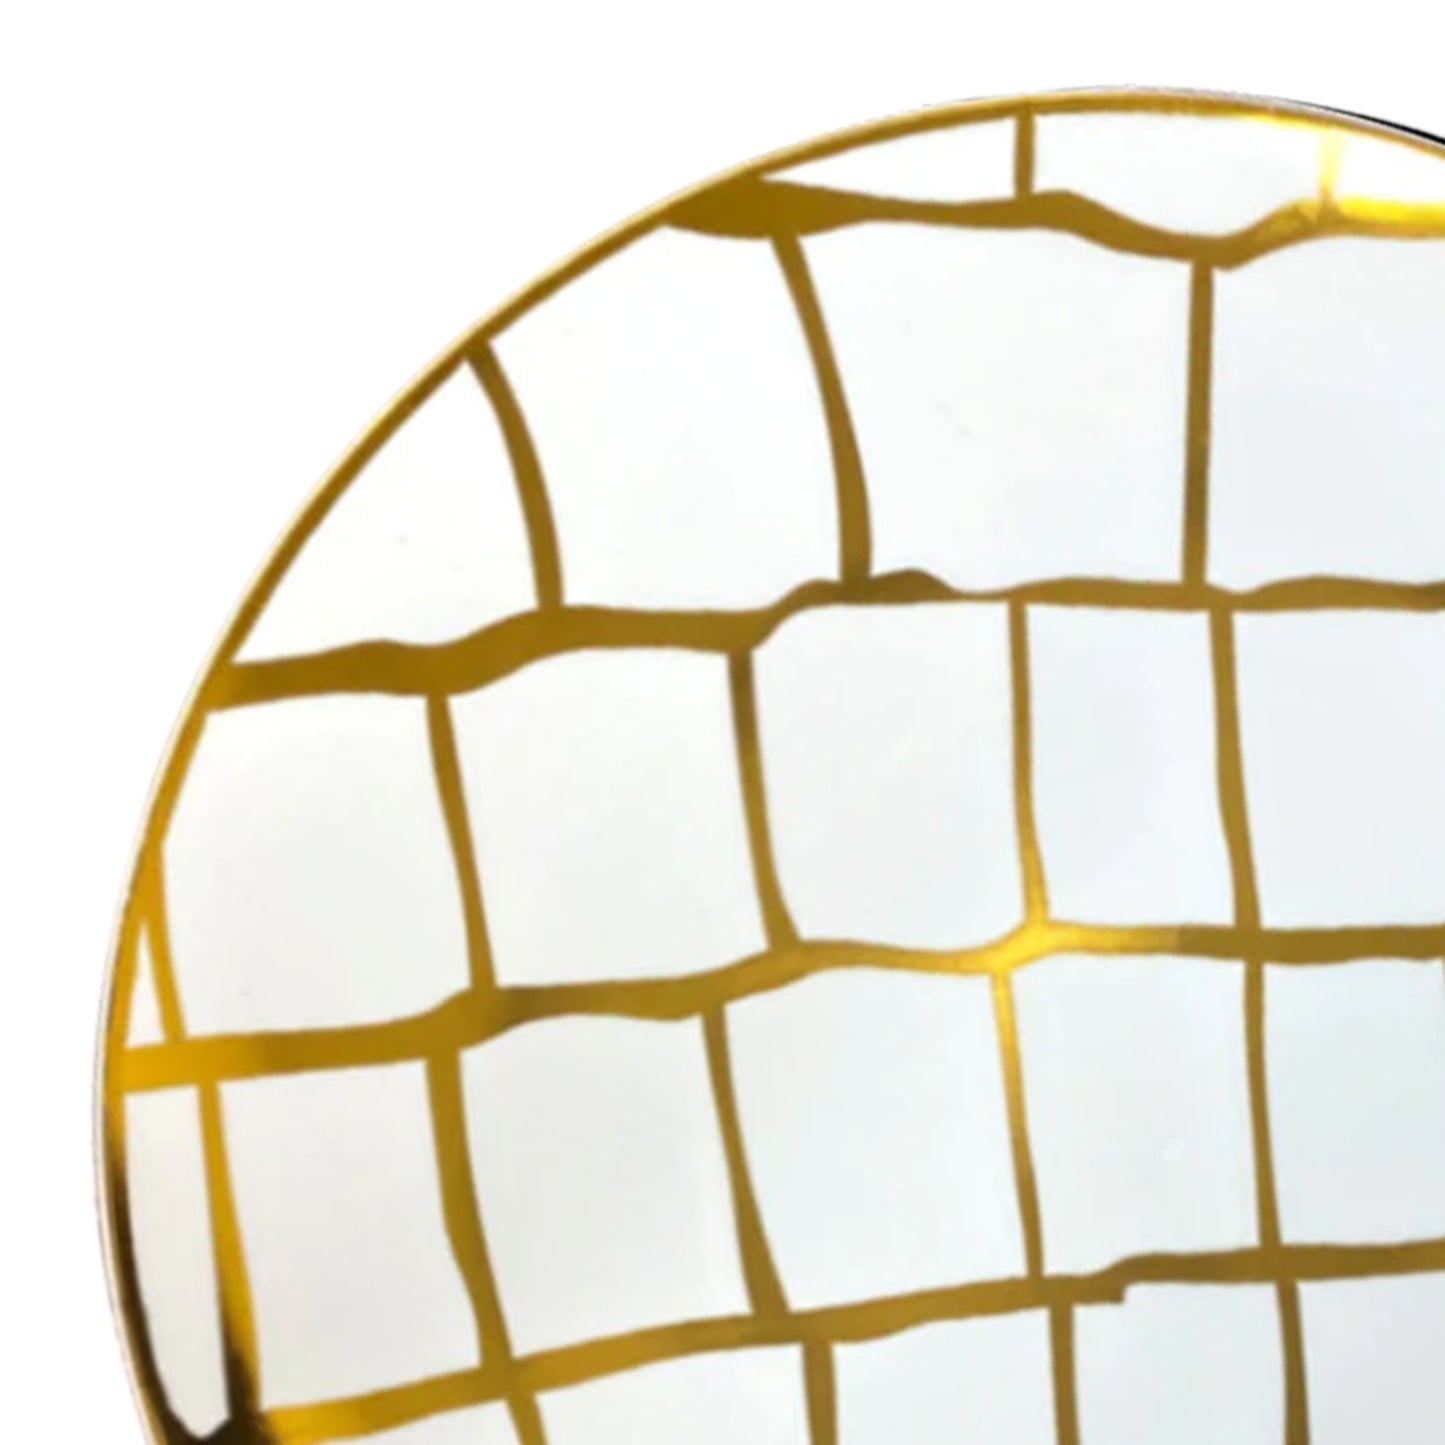 White with Gold Scales Pattern Round Disposable Plastic Dinner Plates (10.25") | The Kaya Collection